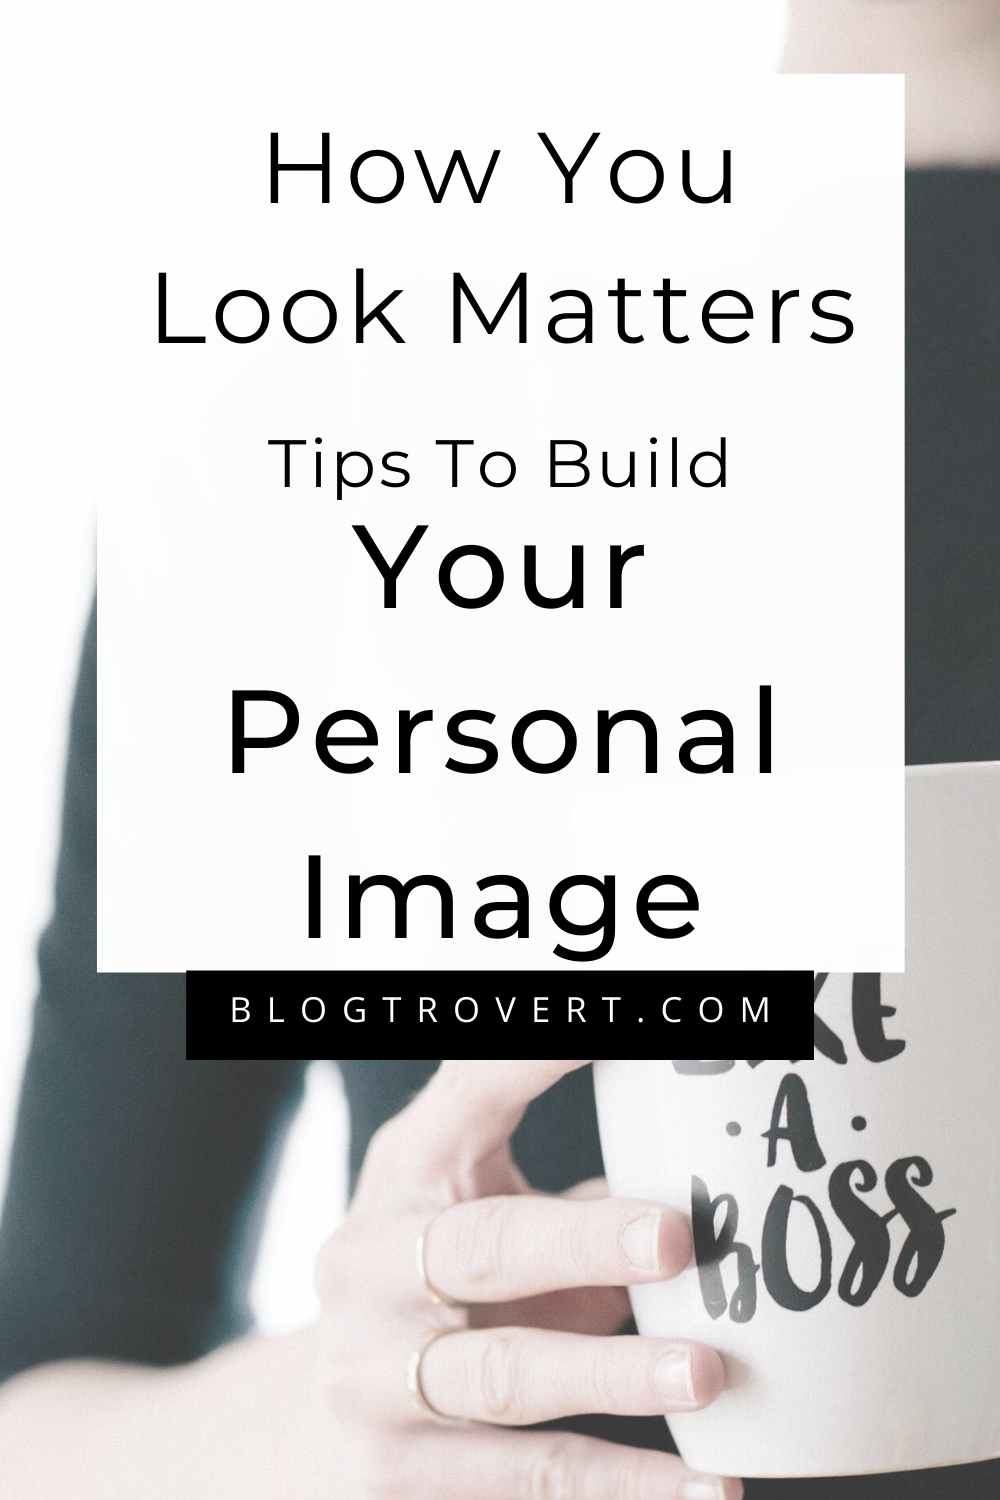 How To Build Your Personal Image; 6 Helpful Steps 4